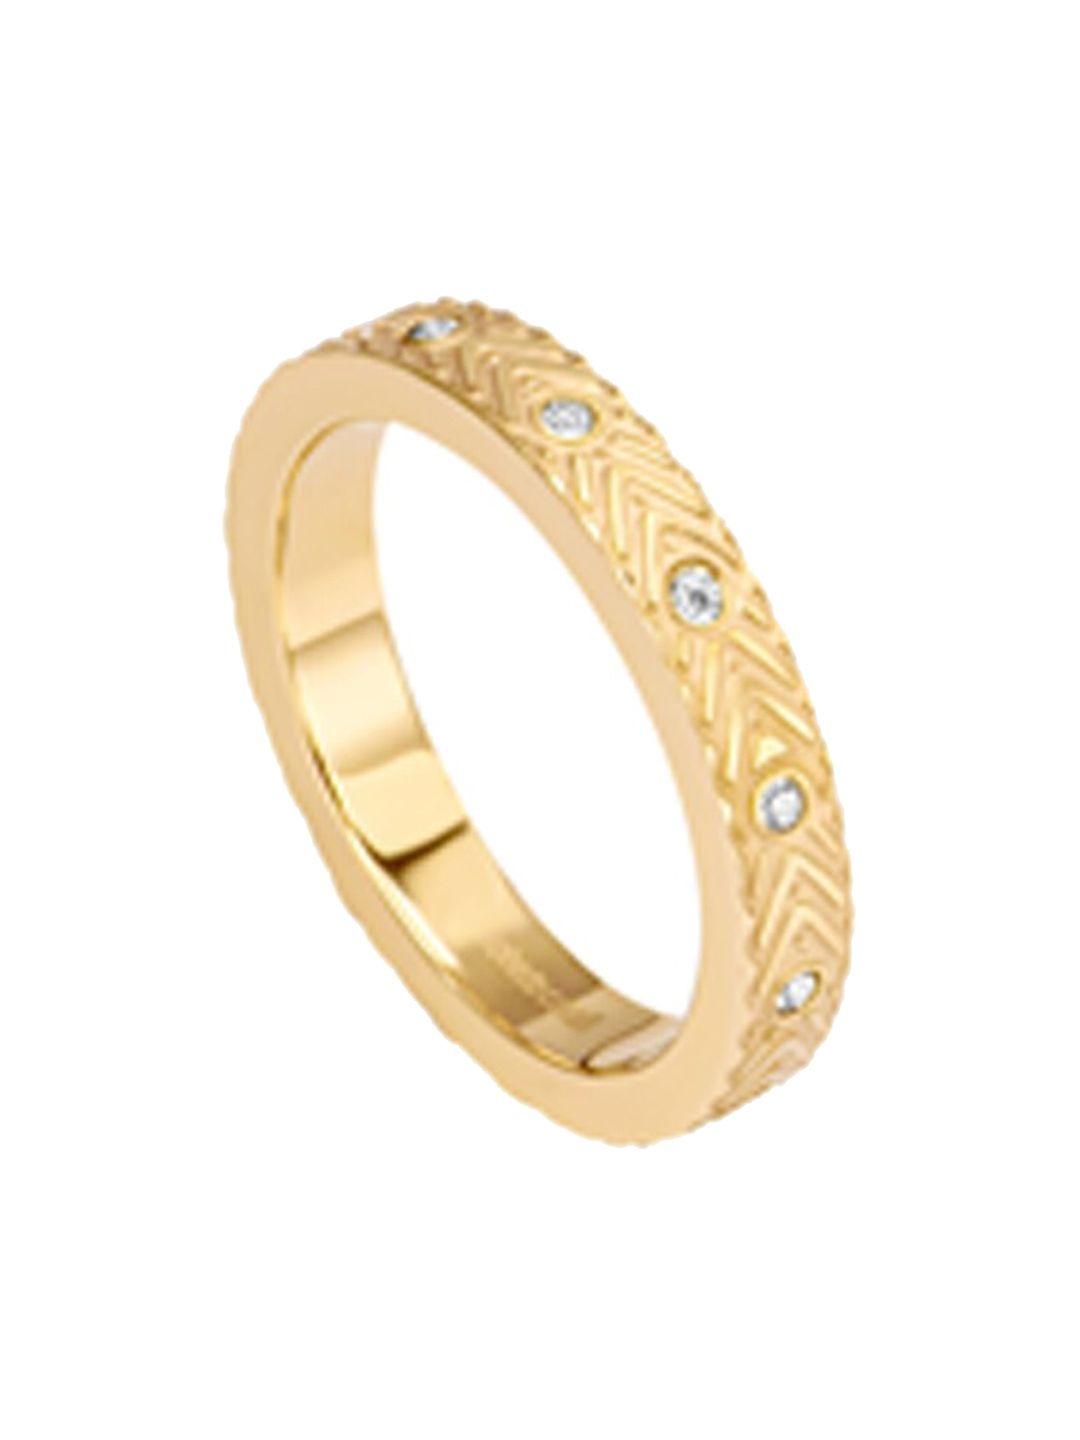 roberto cavalli gold-plated stone-studded finger ring